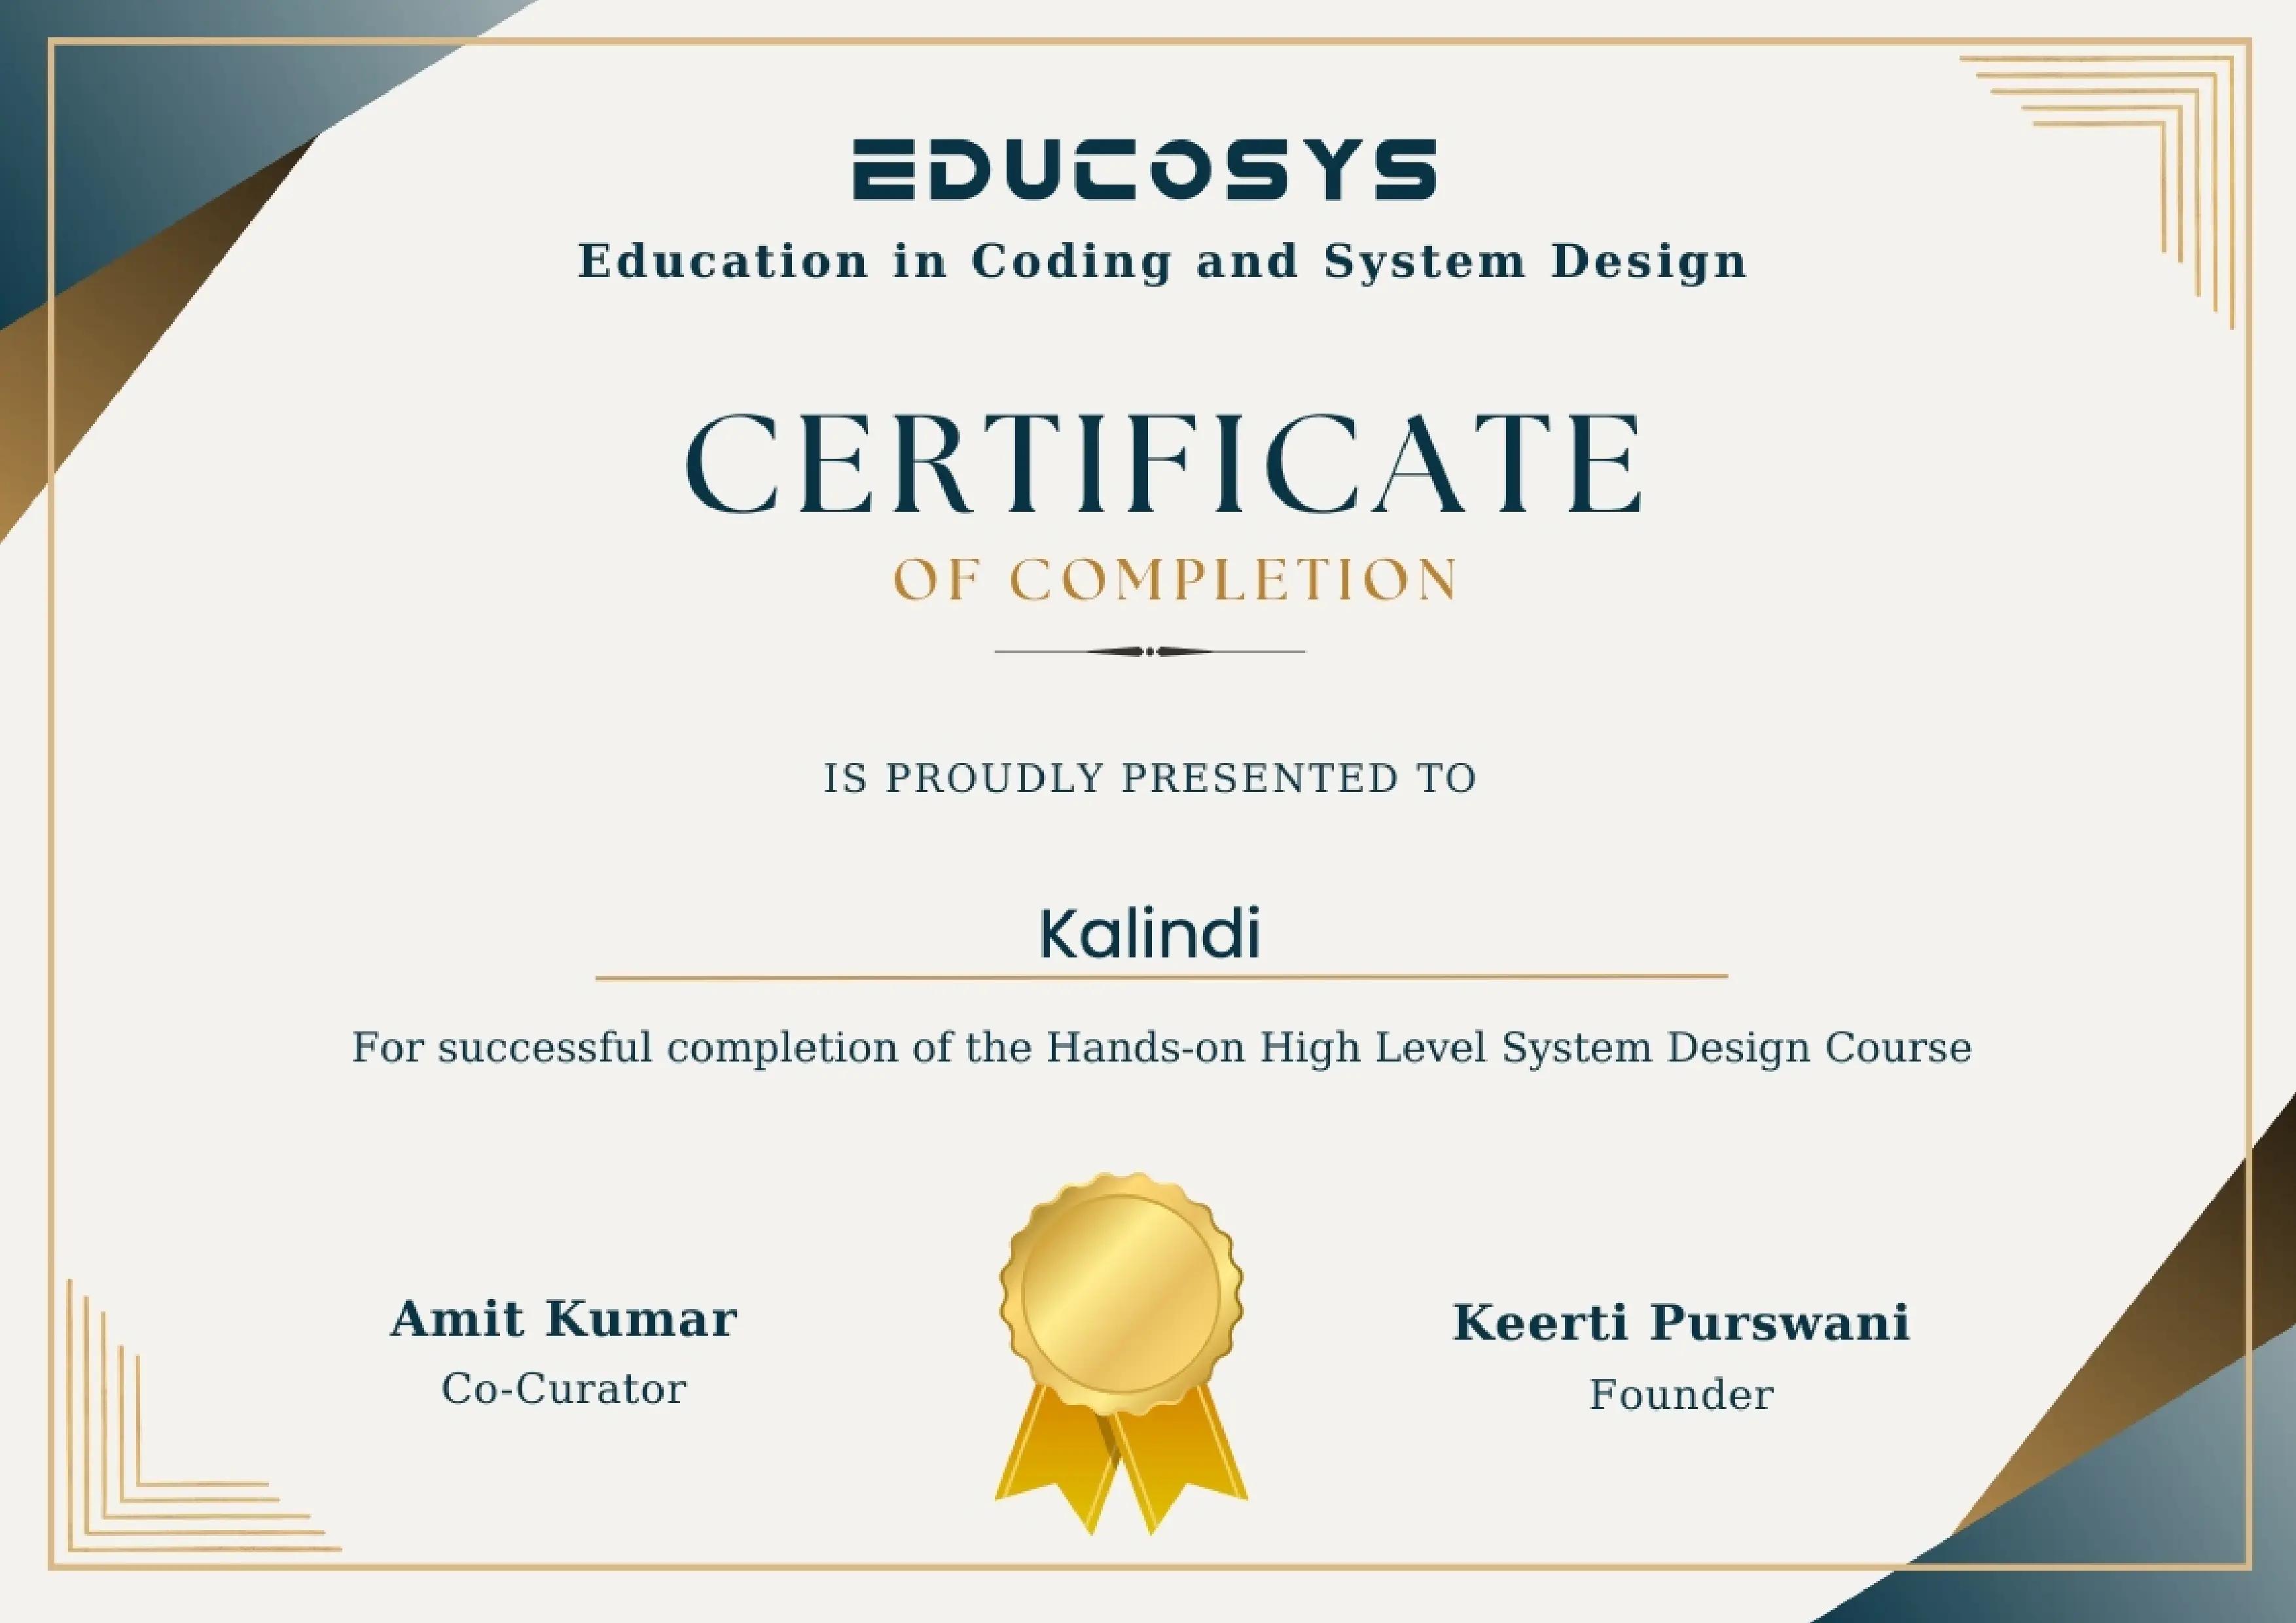 Educosys completion certificate